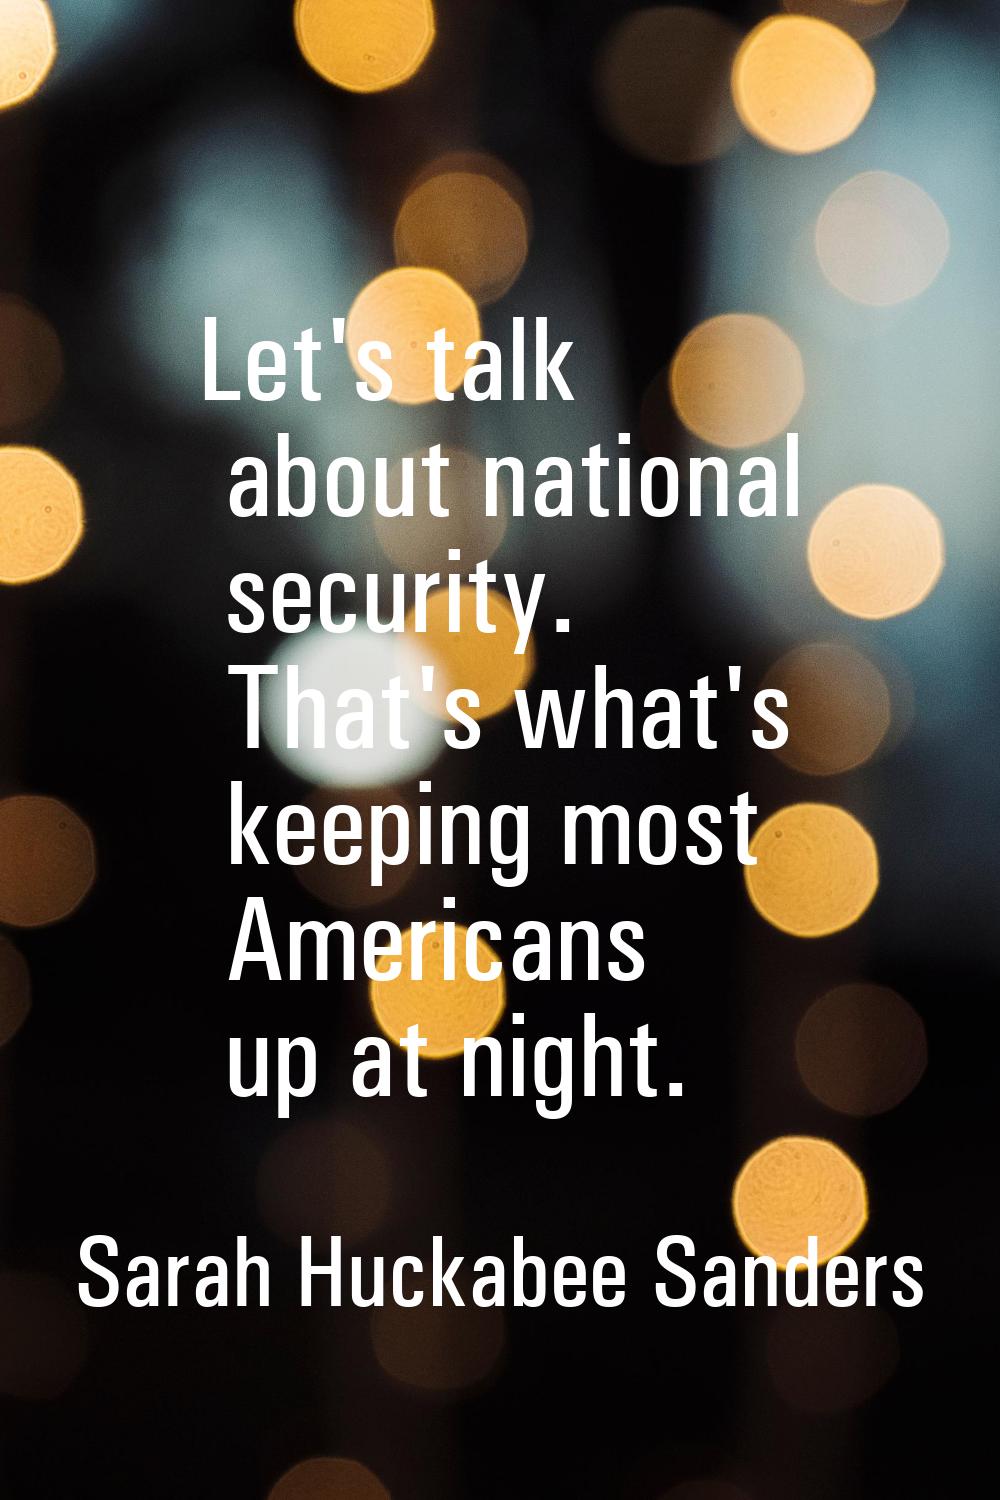 Let's talk about national security. That's what's keeping most Americans up at night.